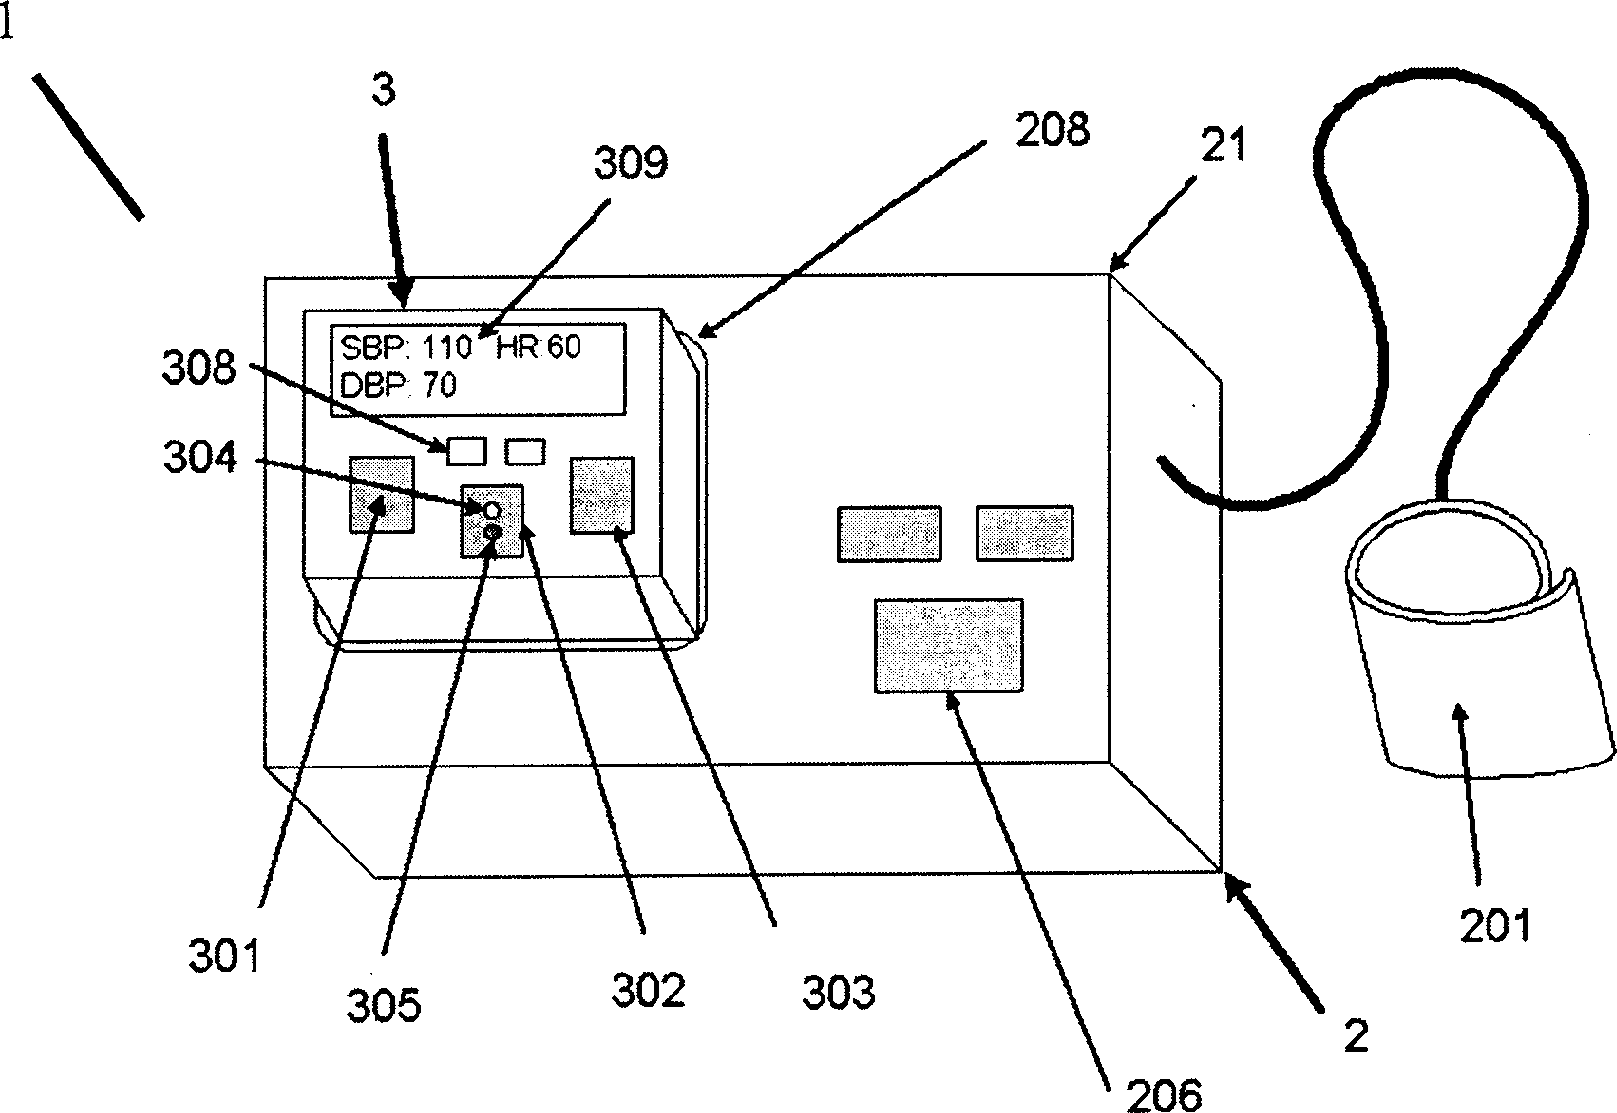 Non-invading blood pressure metering device and method